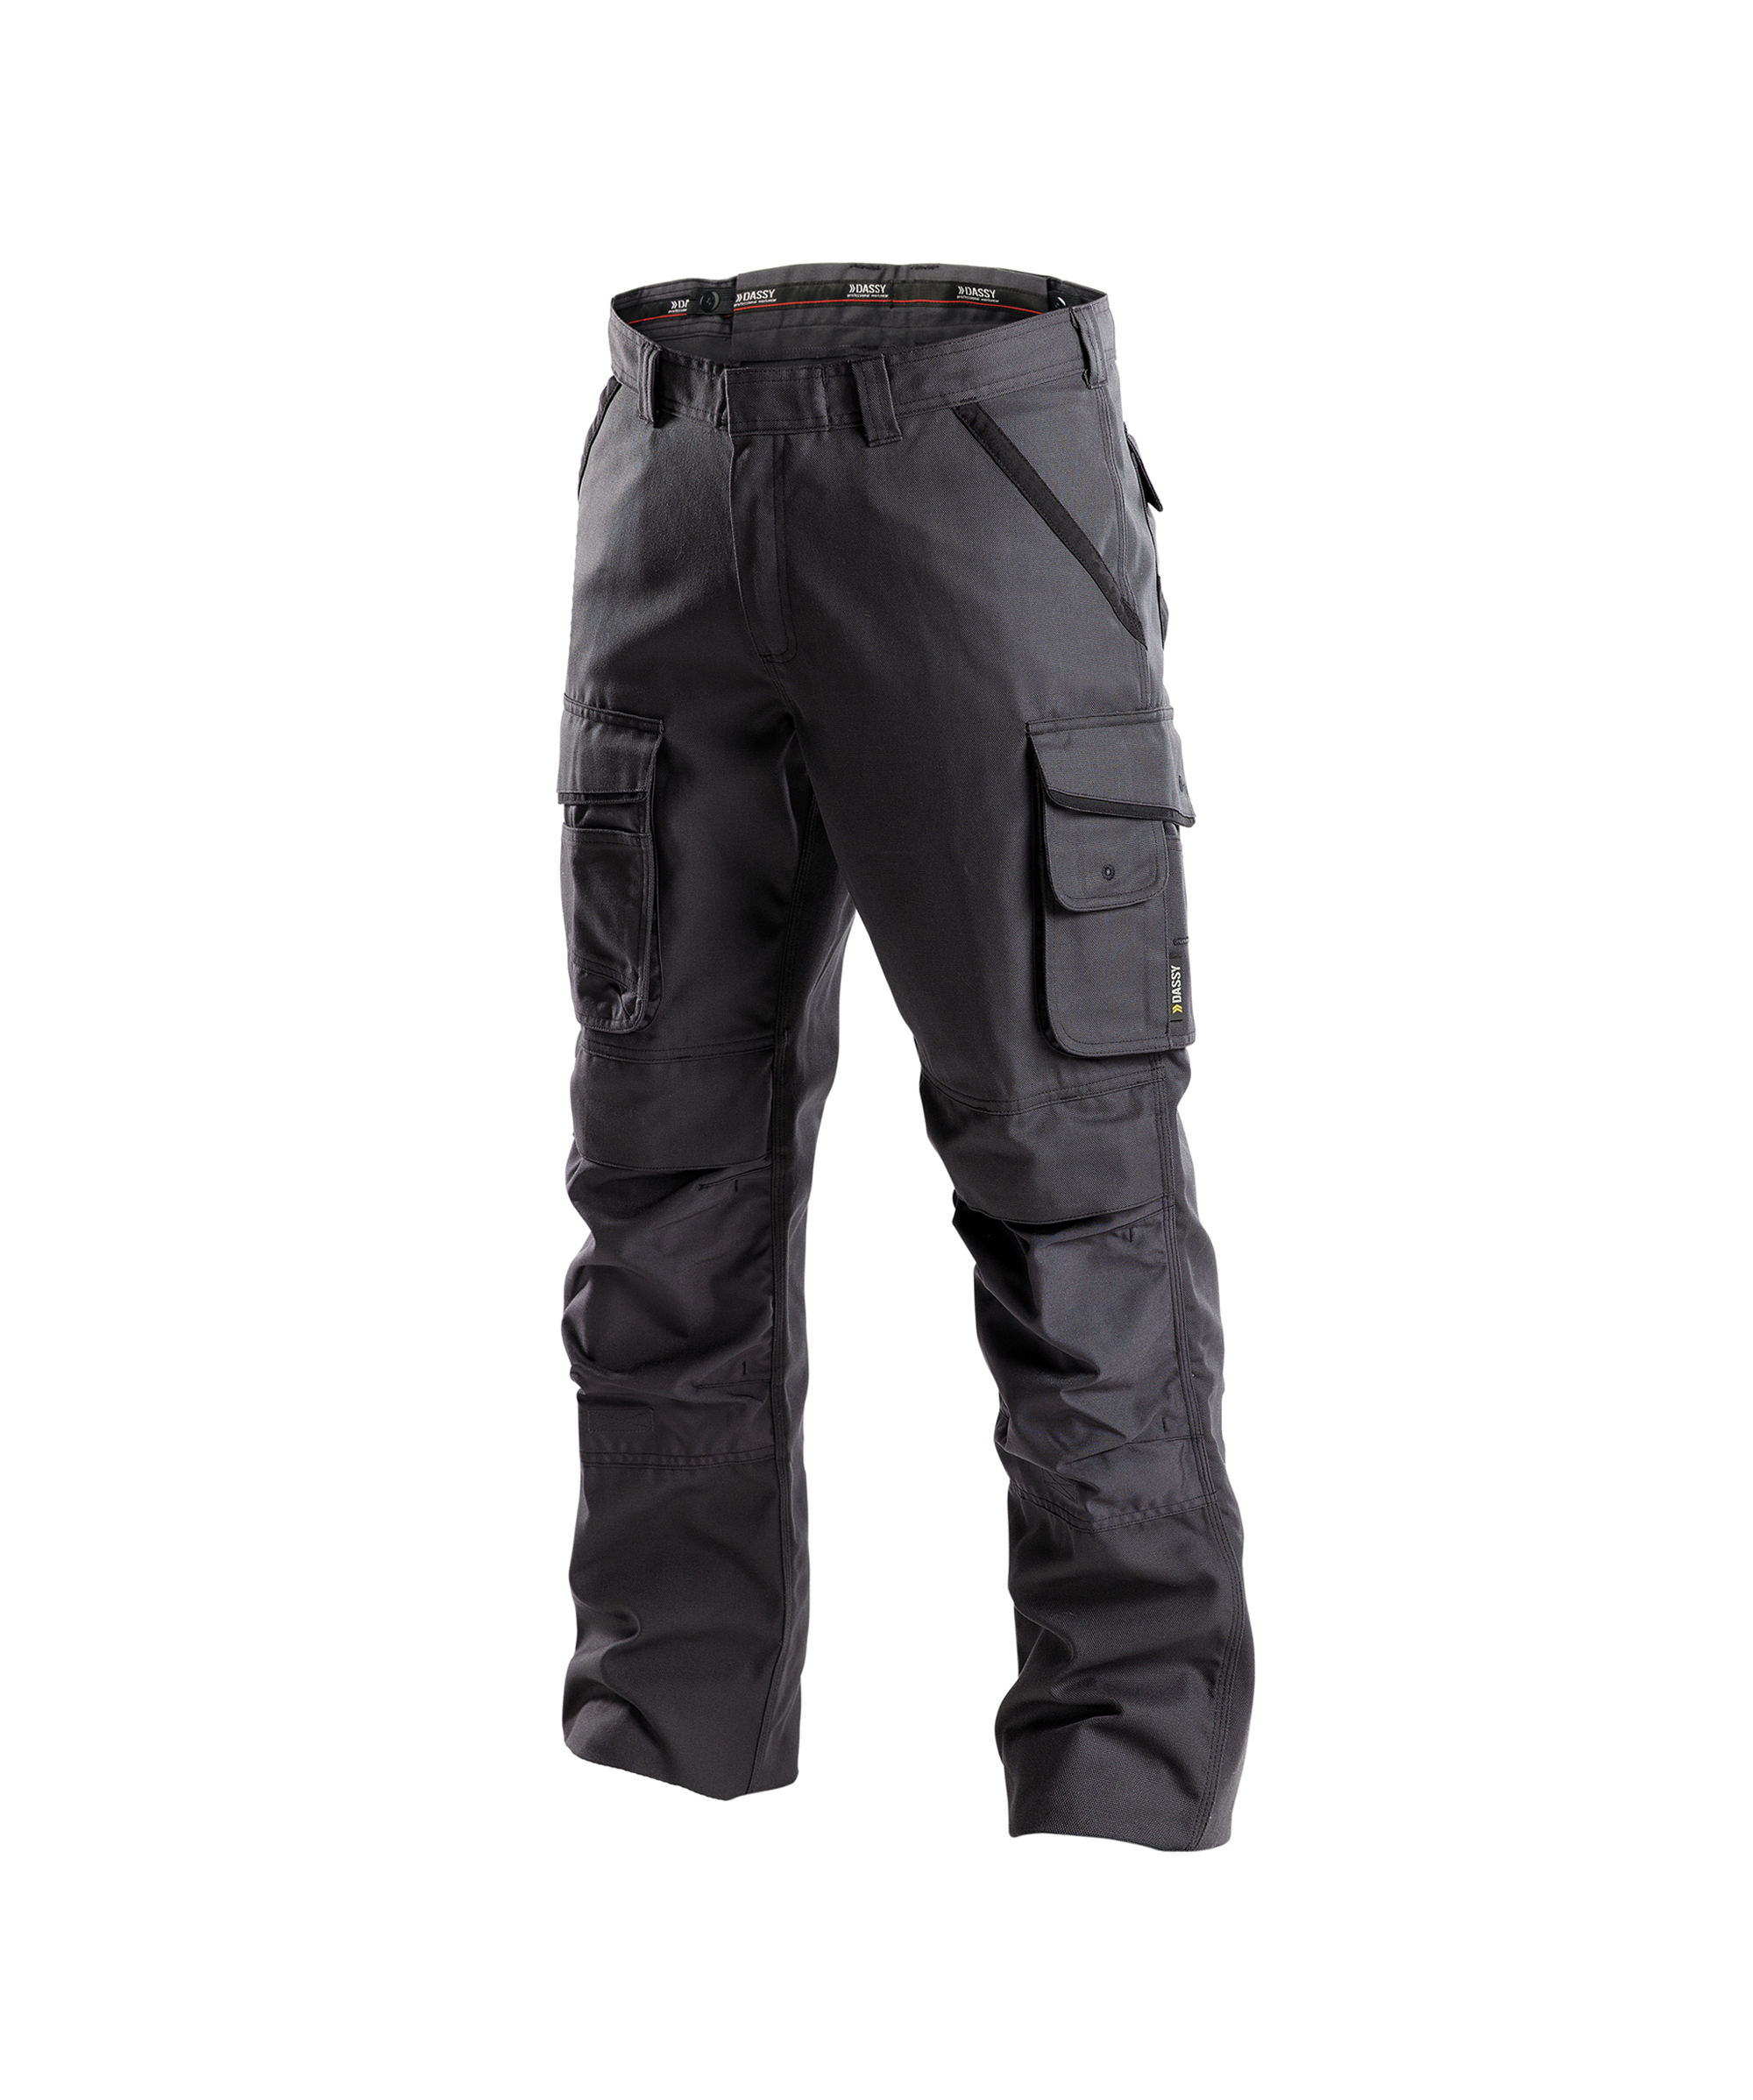 connor_canvas-work-trousers-with-knee-pockets_anthracite-grey-black_side.jpg